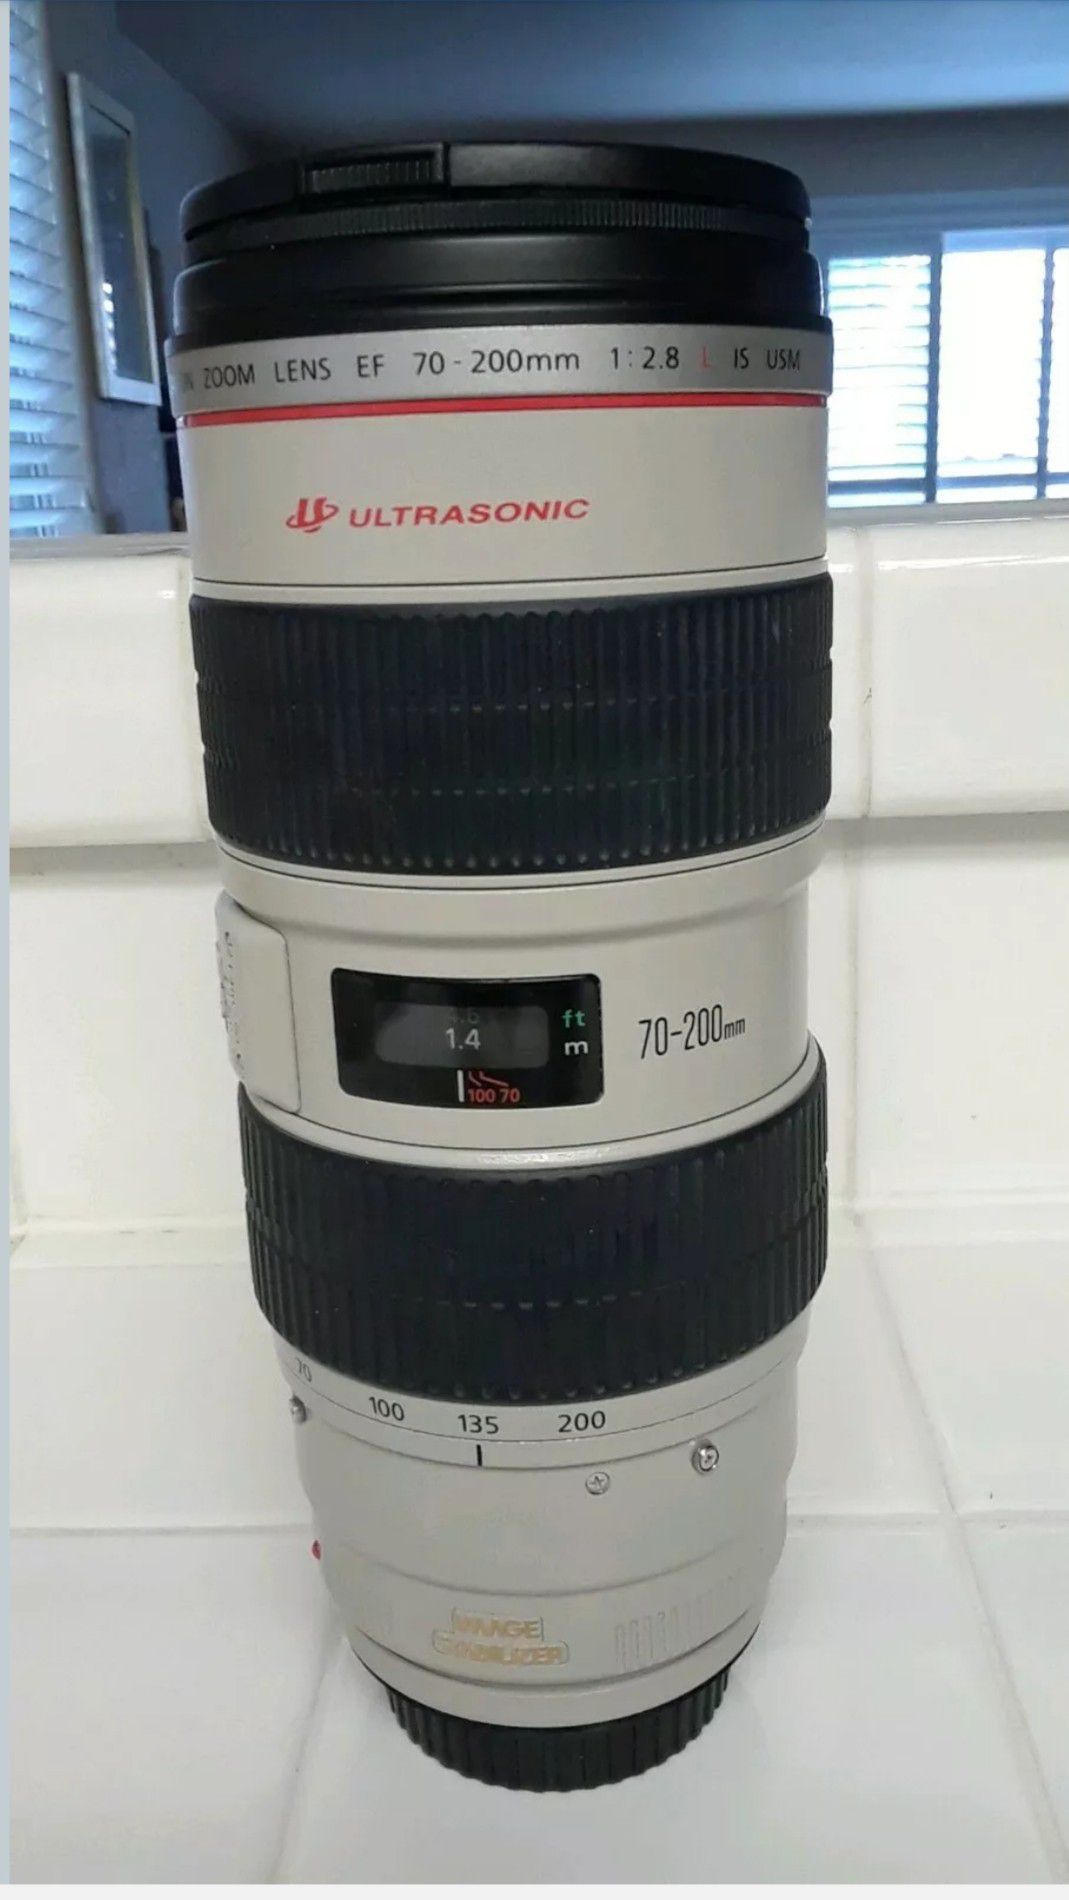 Excellent condition Canon EF 70-200 f/2.8L IS USM